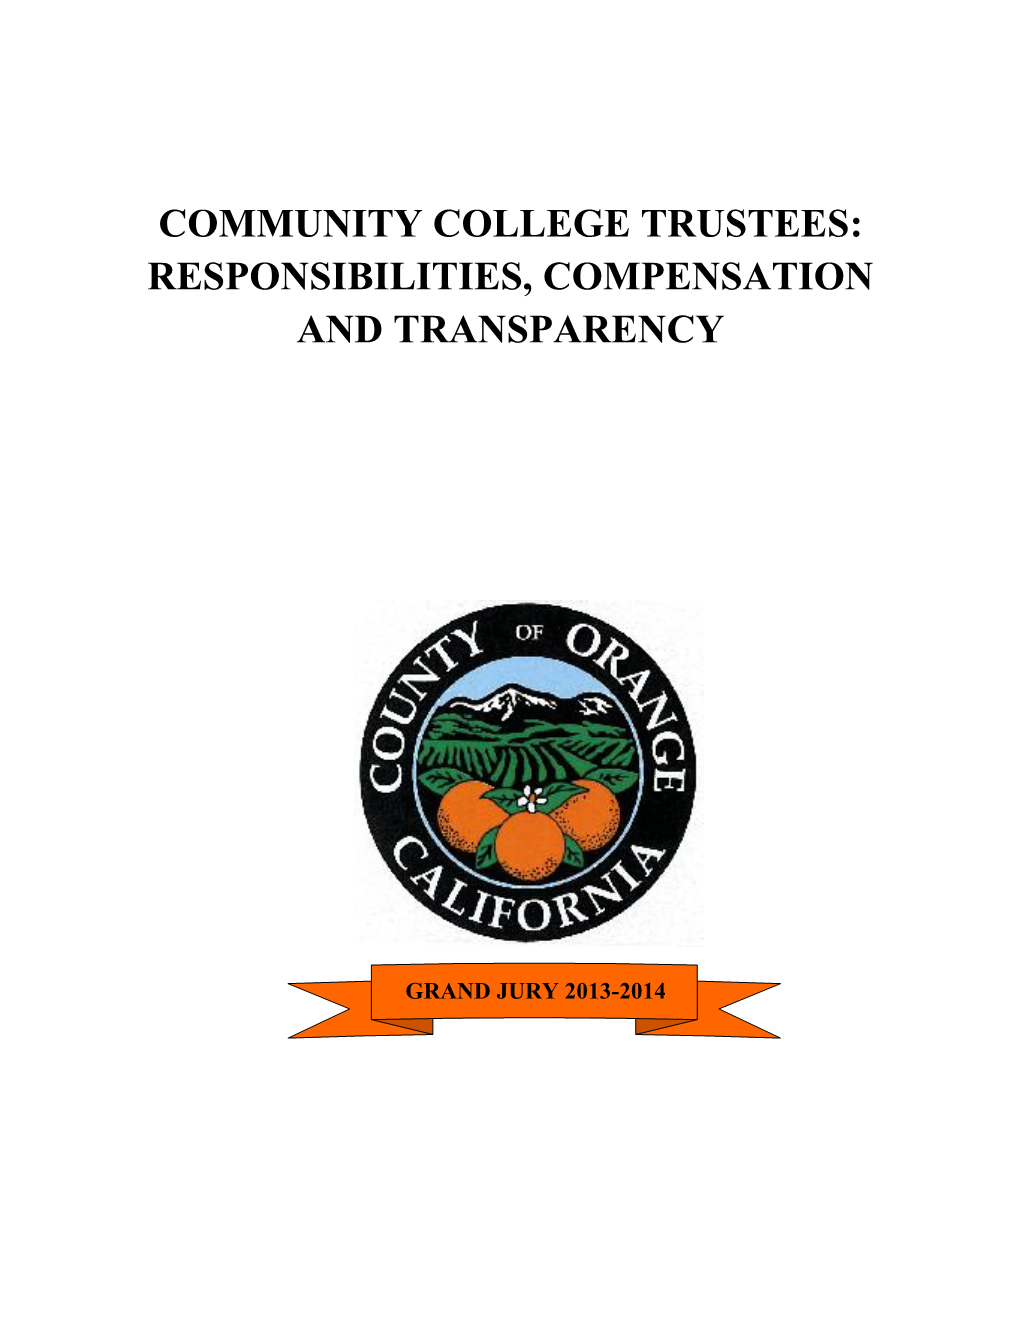 Community College Trustees: Responsibilities, Compensation and Transparency